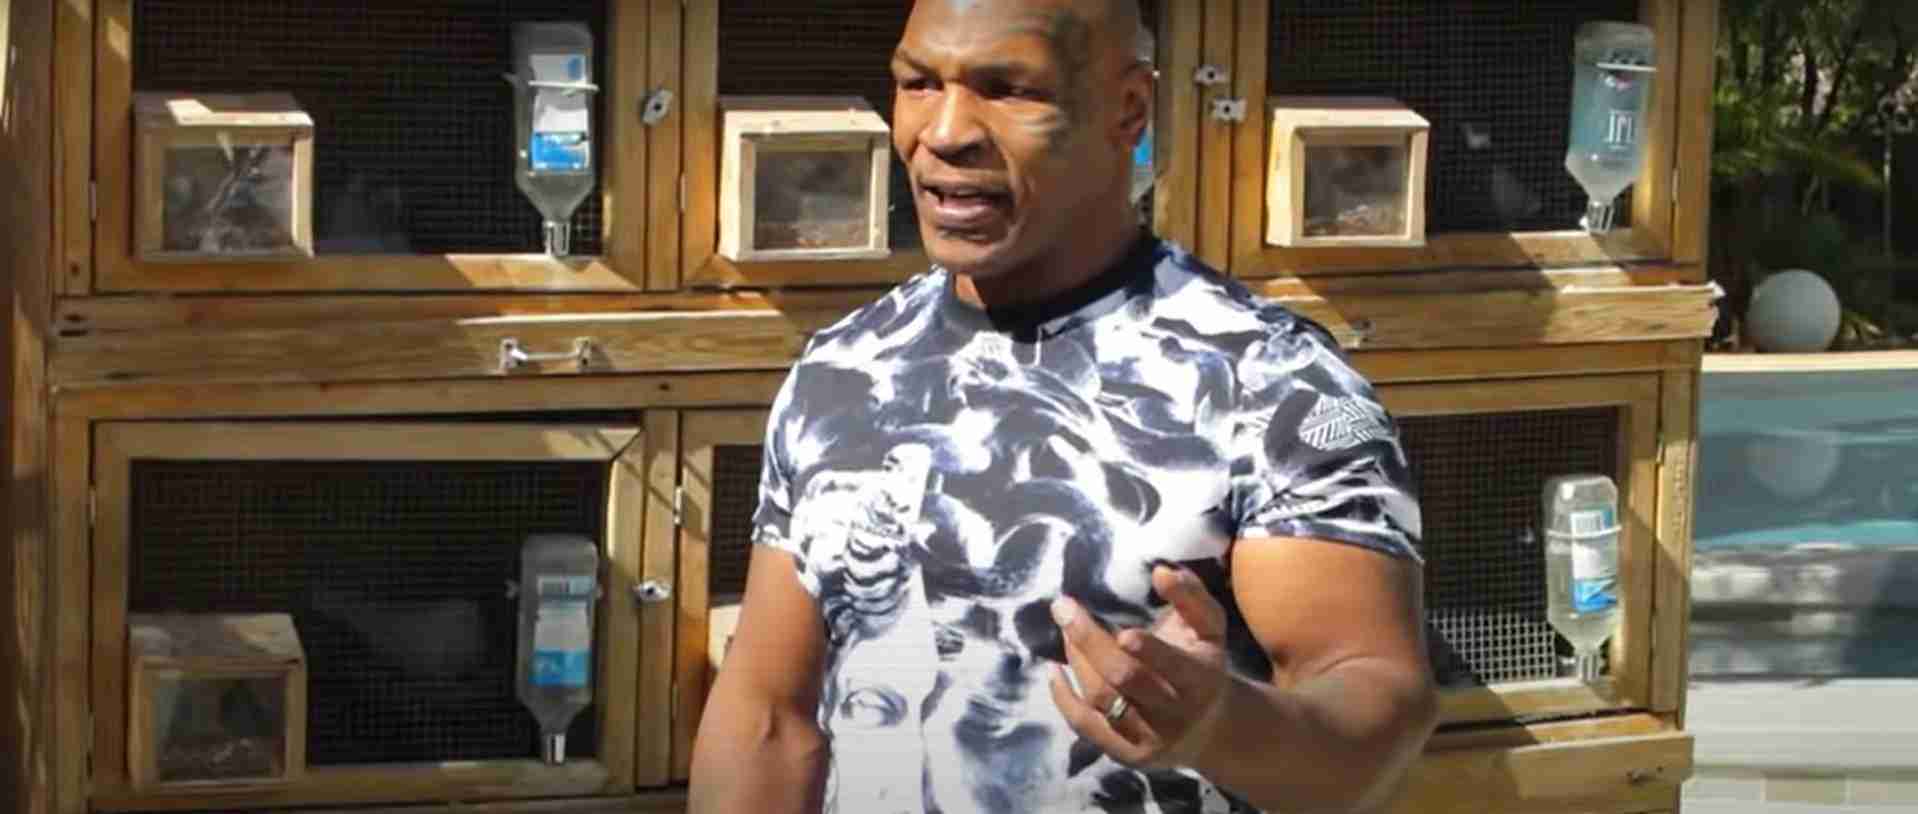 Tyson Takes Love Of Pigeons To New Level